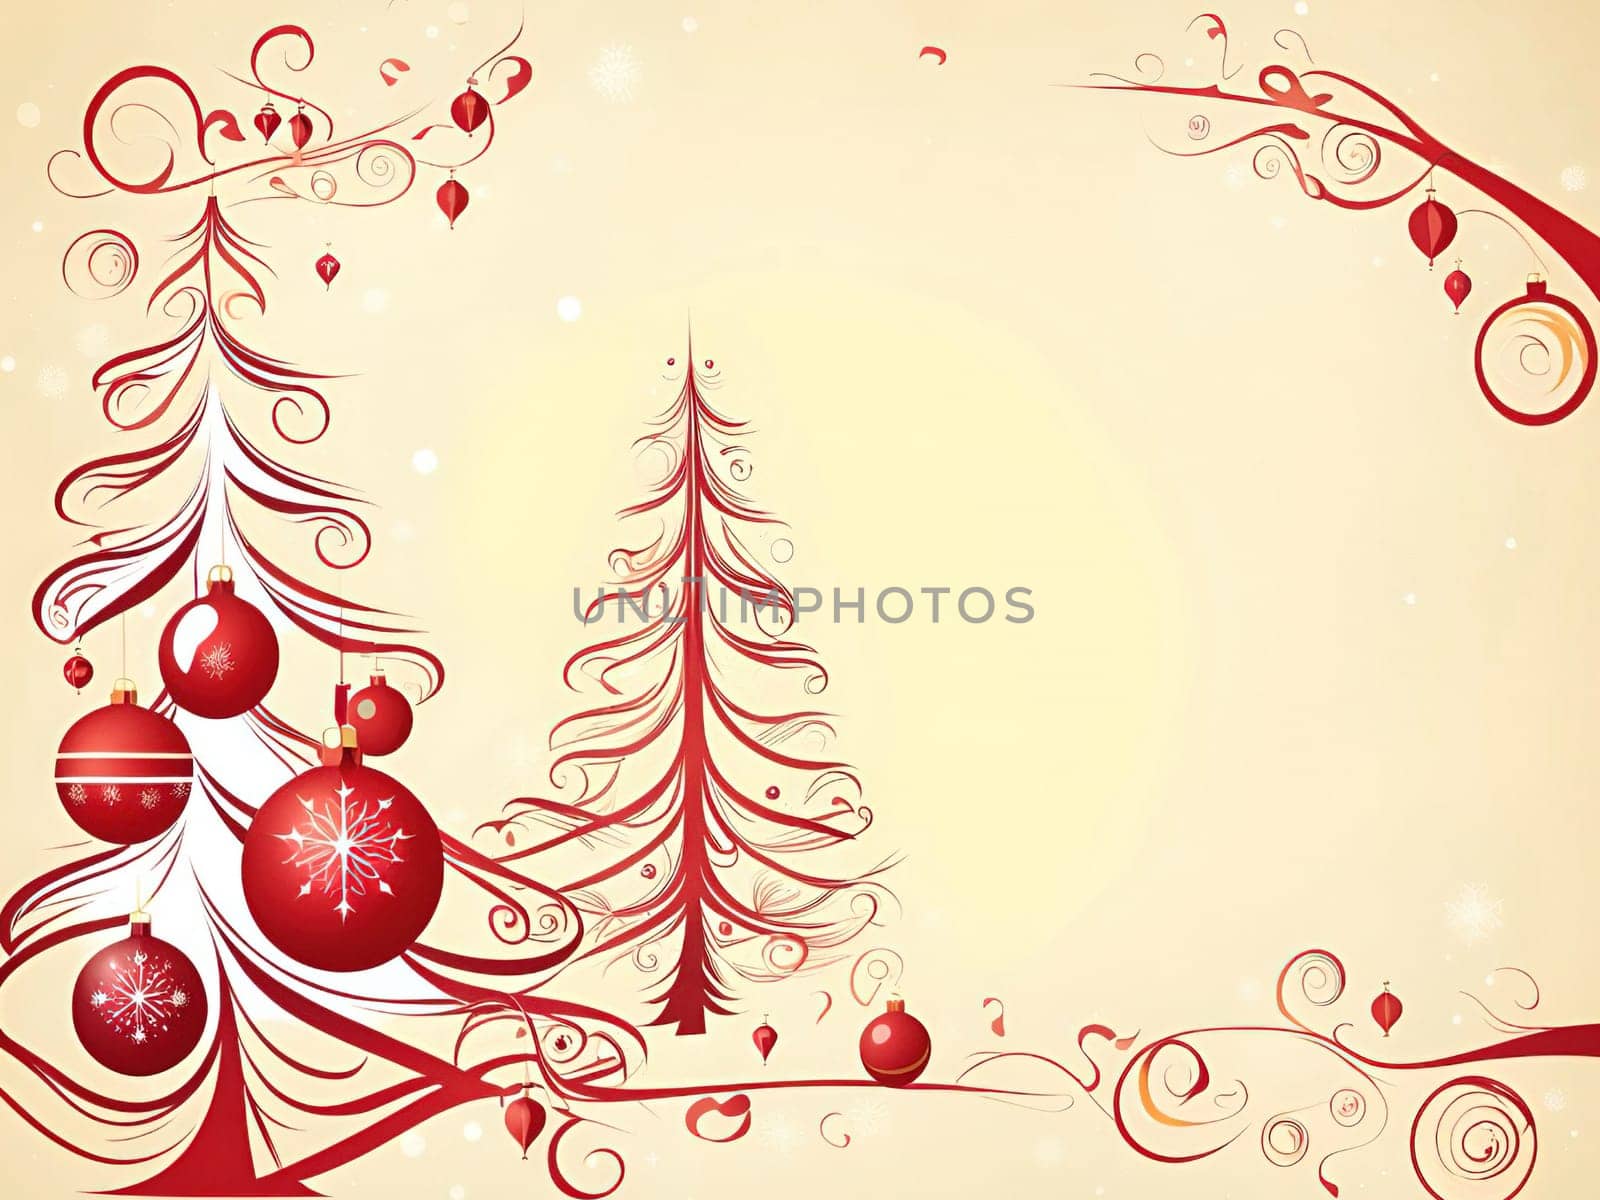 Christmas and New Year greeting card. space for text. Merry Christmas and Happy New Year background with Christmas tree. Christmas background with baubles and fir branches. Vector illustration.